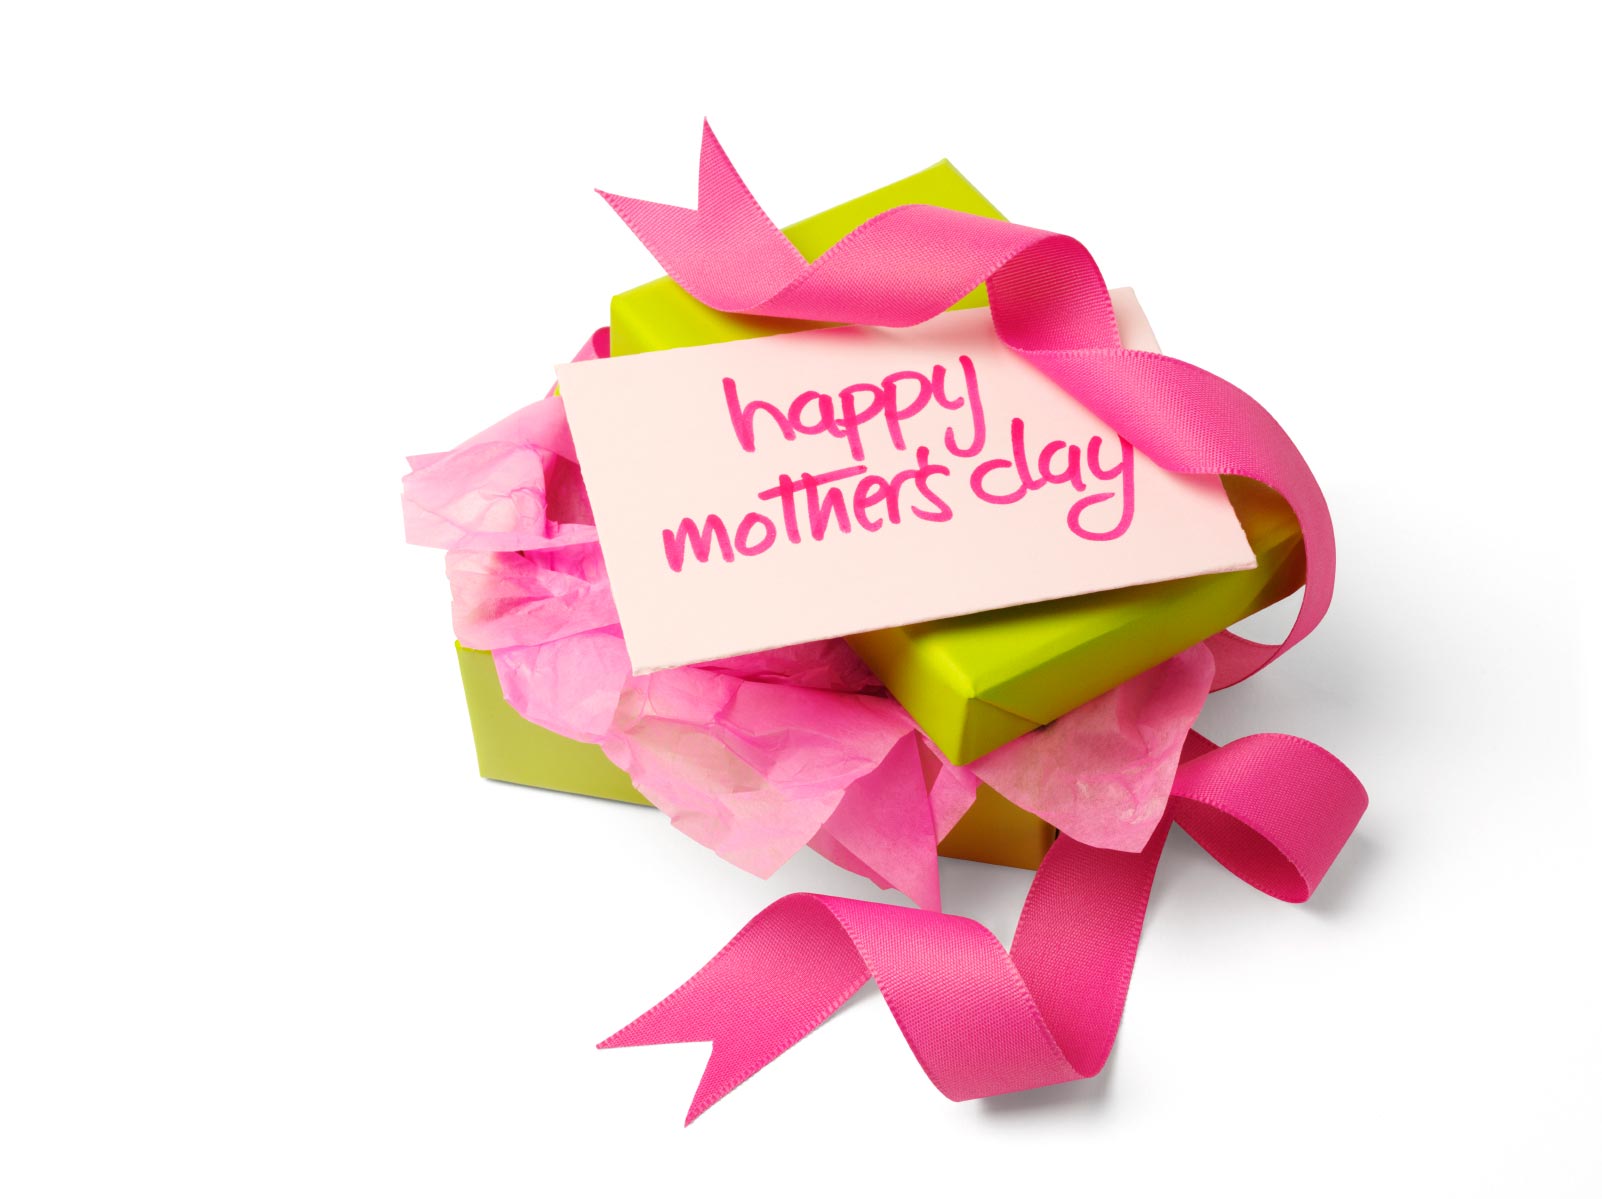 Happy Mothers Day Cards Wallpaper And